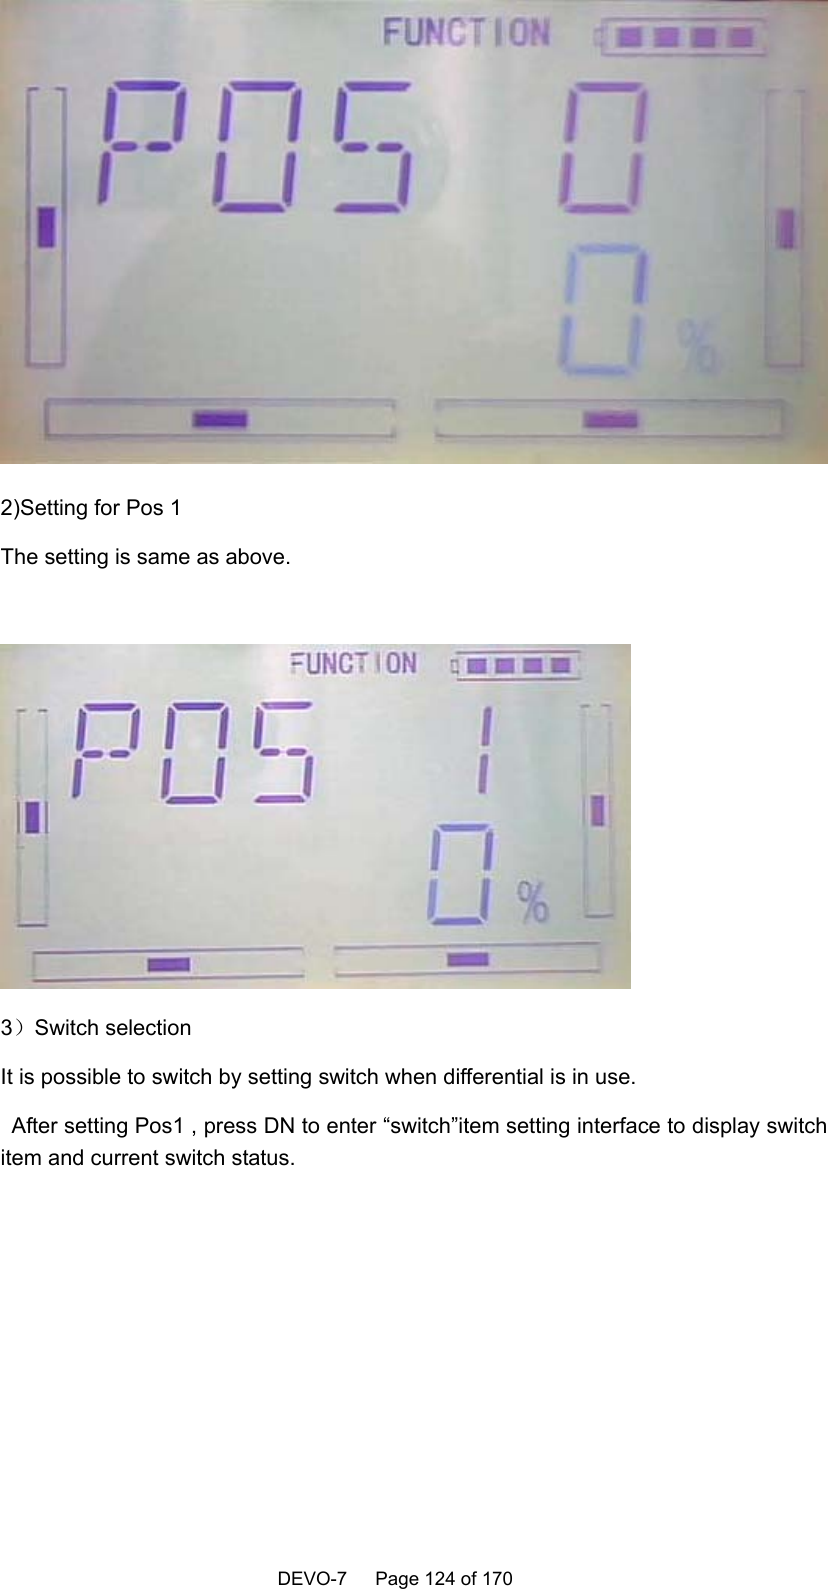    DEVO-7   Page 124 of 170    2)Setting for Pos 1 The setting is same as above.   3）Switch selection It is possible to switch by setting switch when differential is in use. After setting Pos1 , press DN to enter “switch”item setting interface to display switch item and current switch status.   